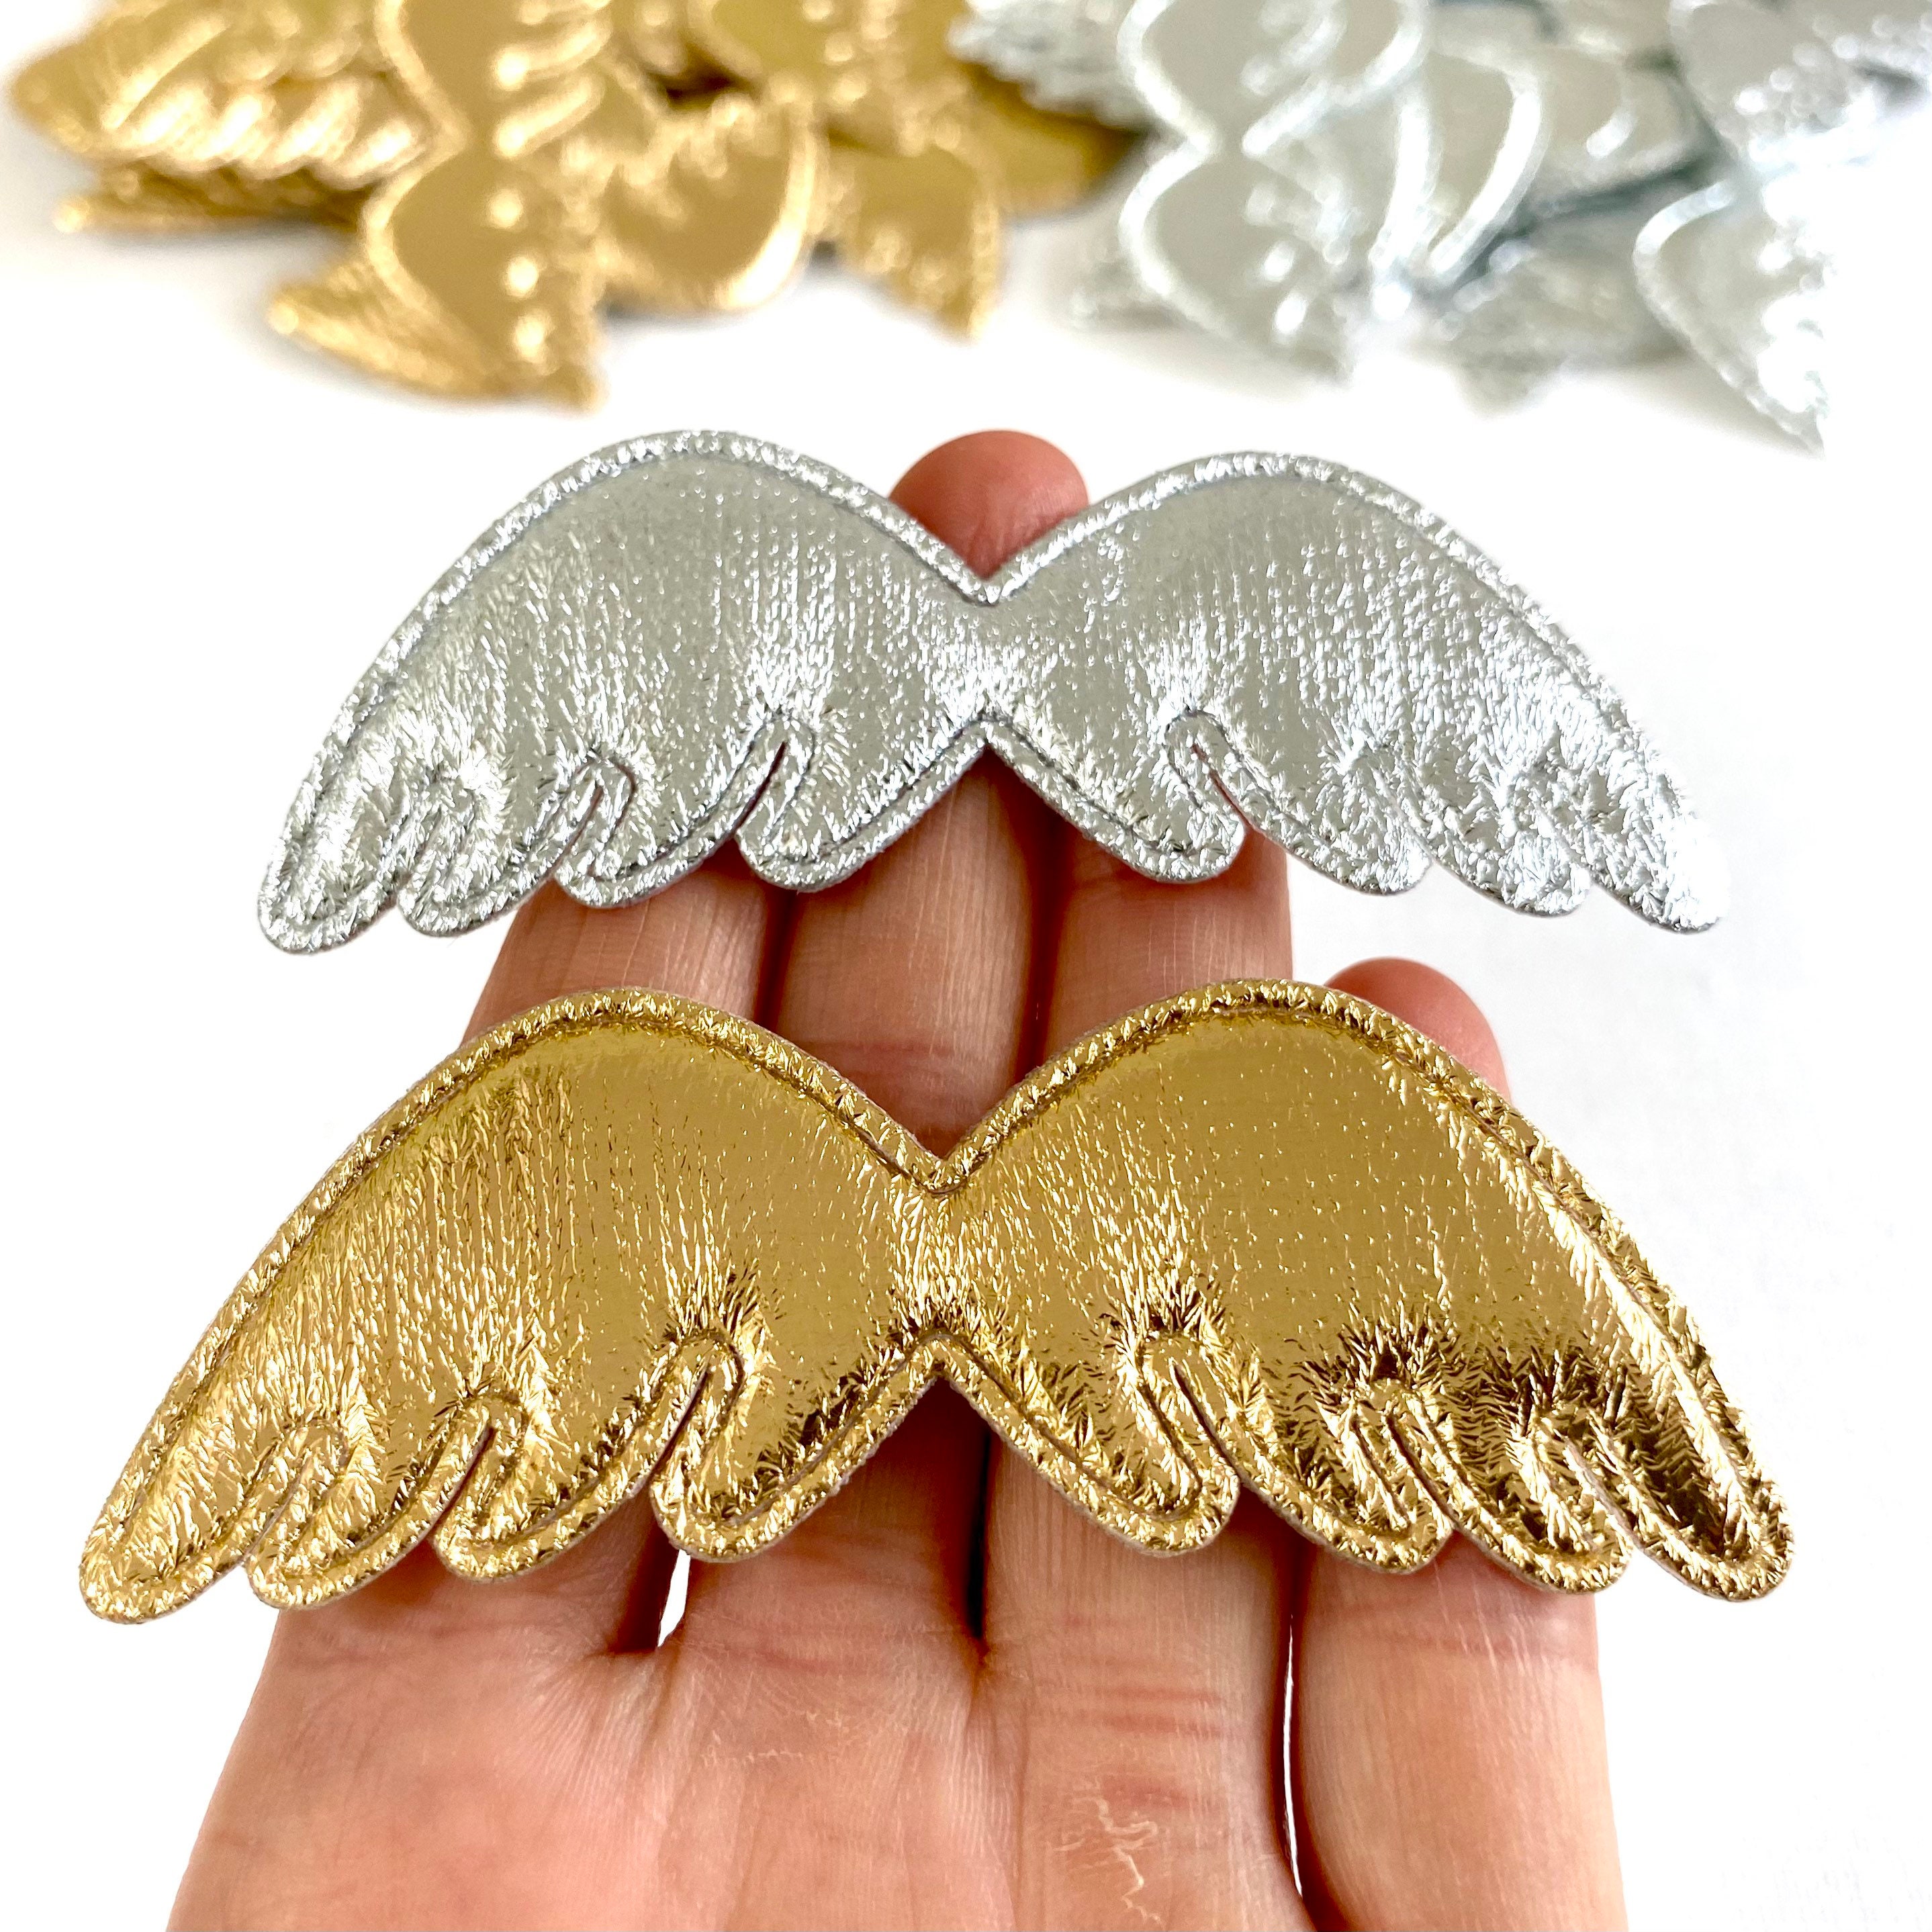 Healifty 30pcs Wings Patches PU Angel Wing Iridescent Hair Hoop Embroidered Applique for Jackets Bags Cloth DIY Crafts Children Hair Accessories 